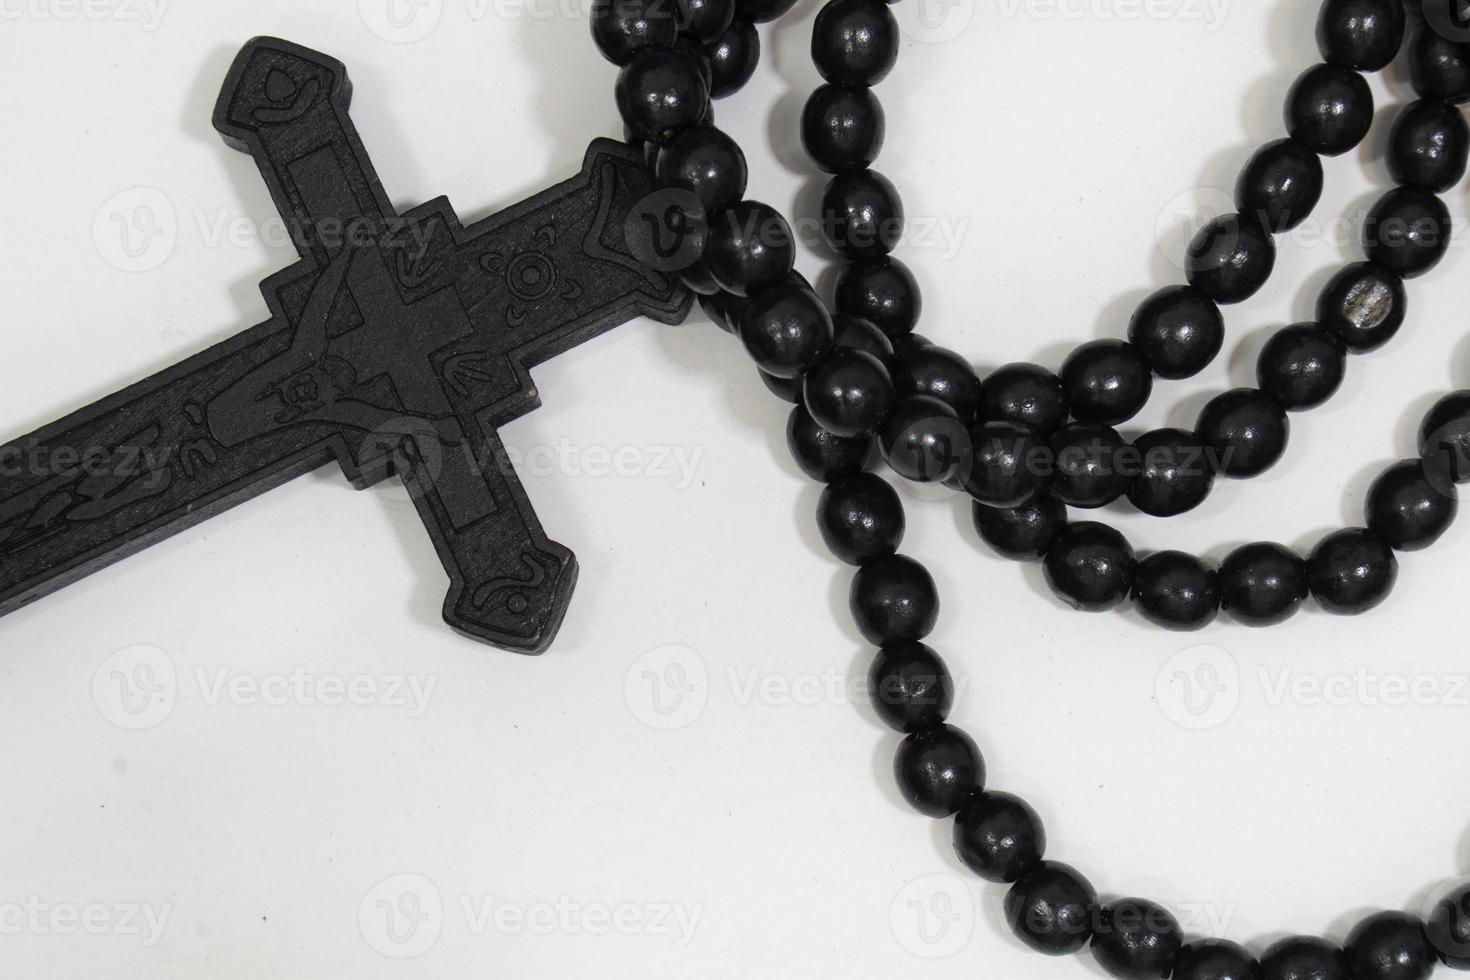 rosary beads with cross made of black wood on a white background, selected focus on christ, narrow depth of field. photo